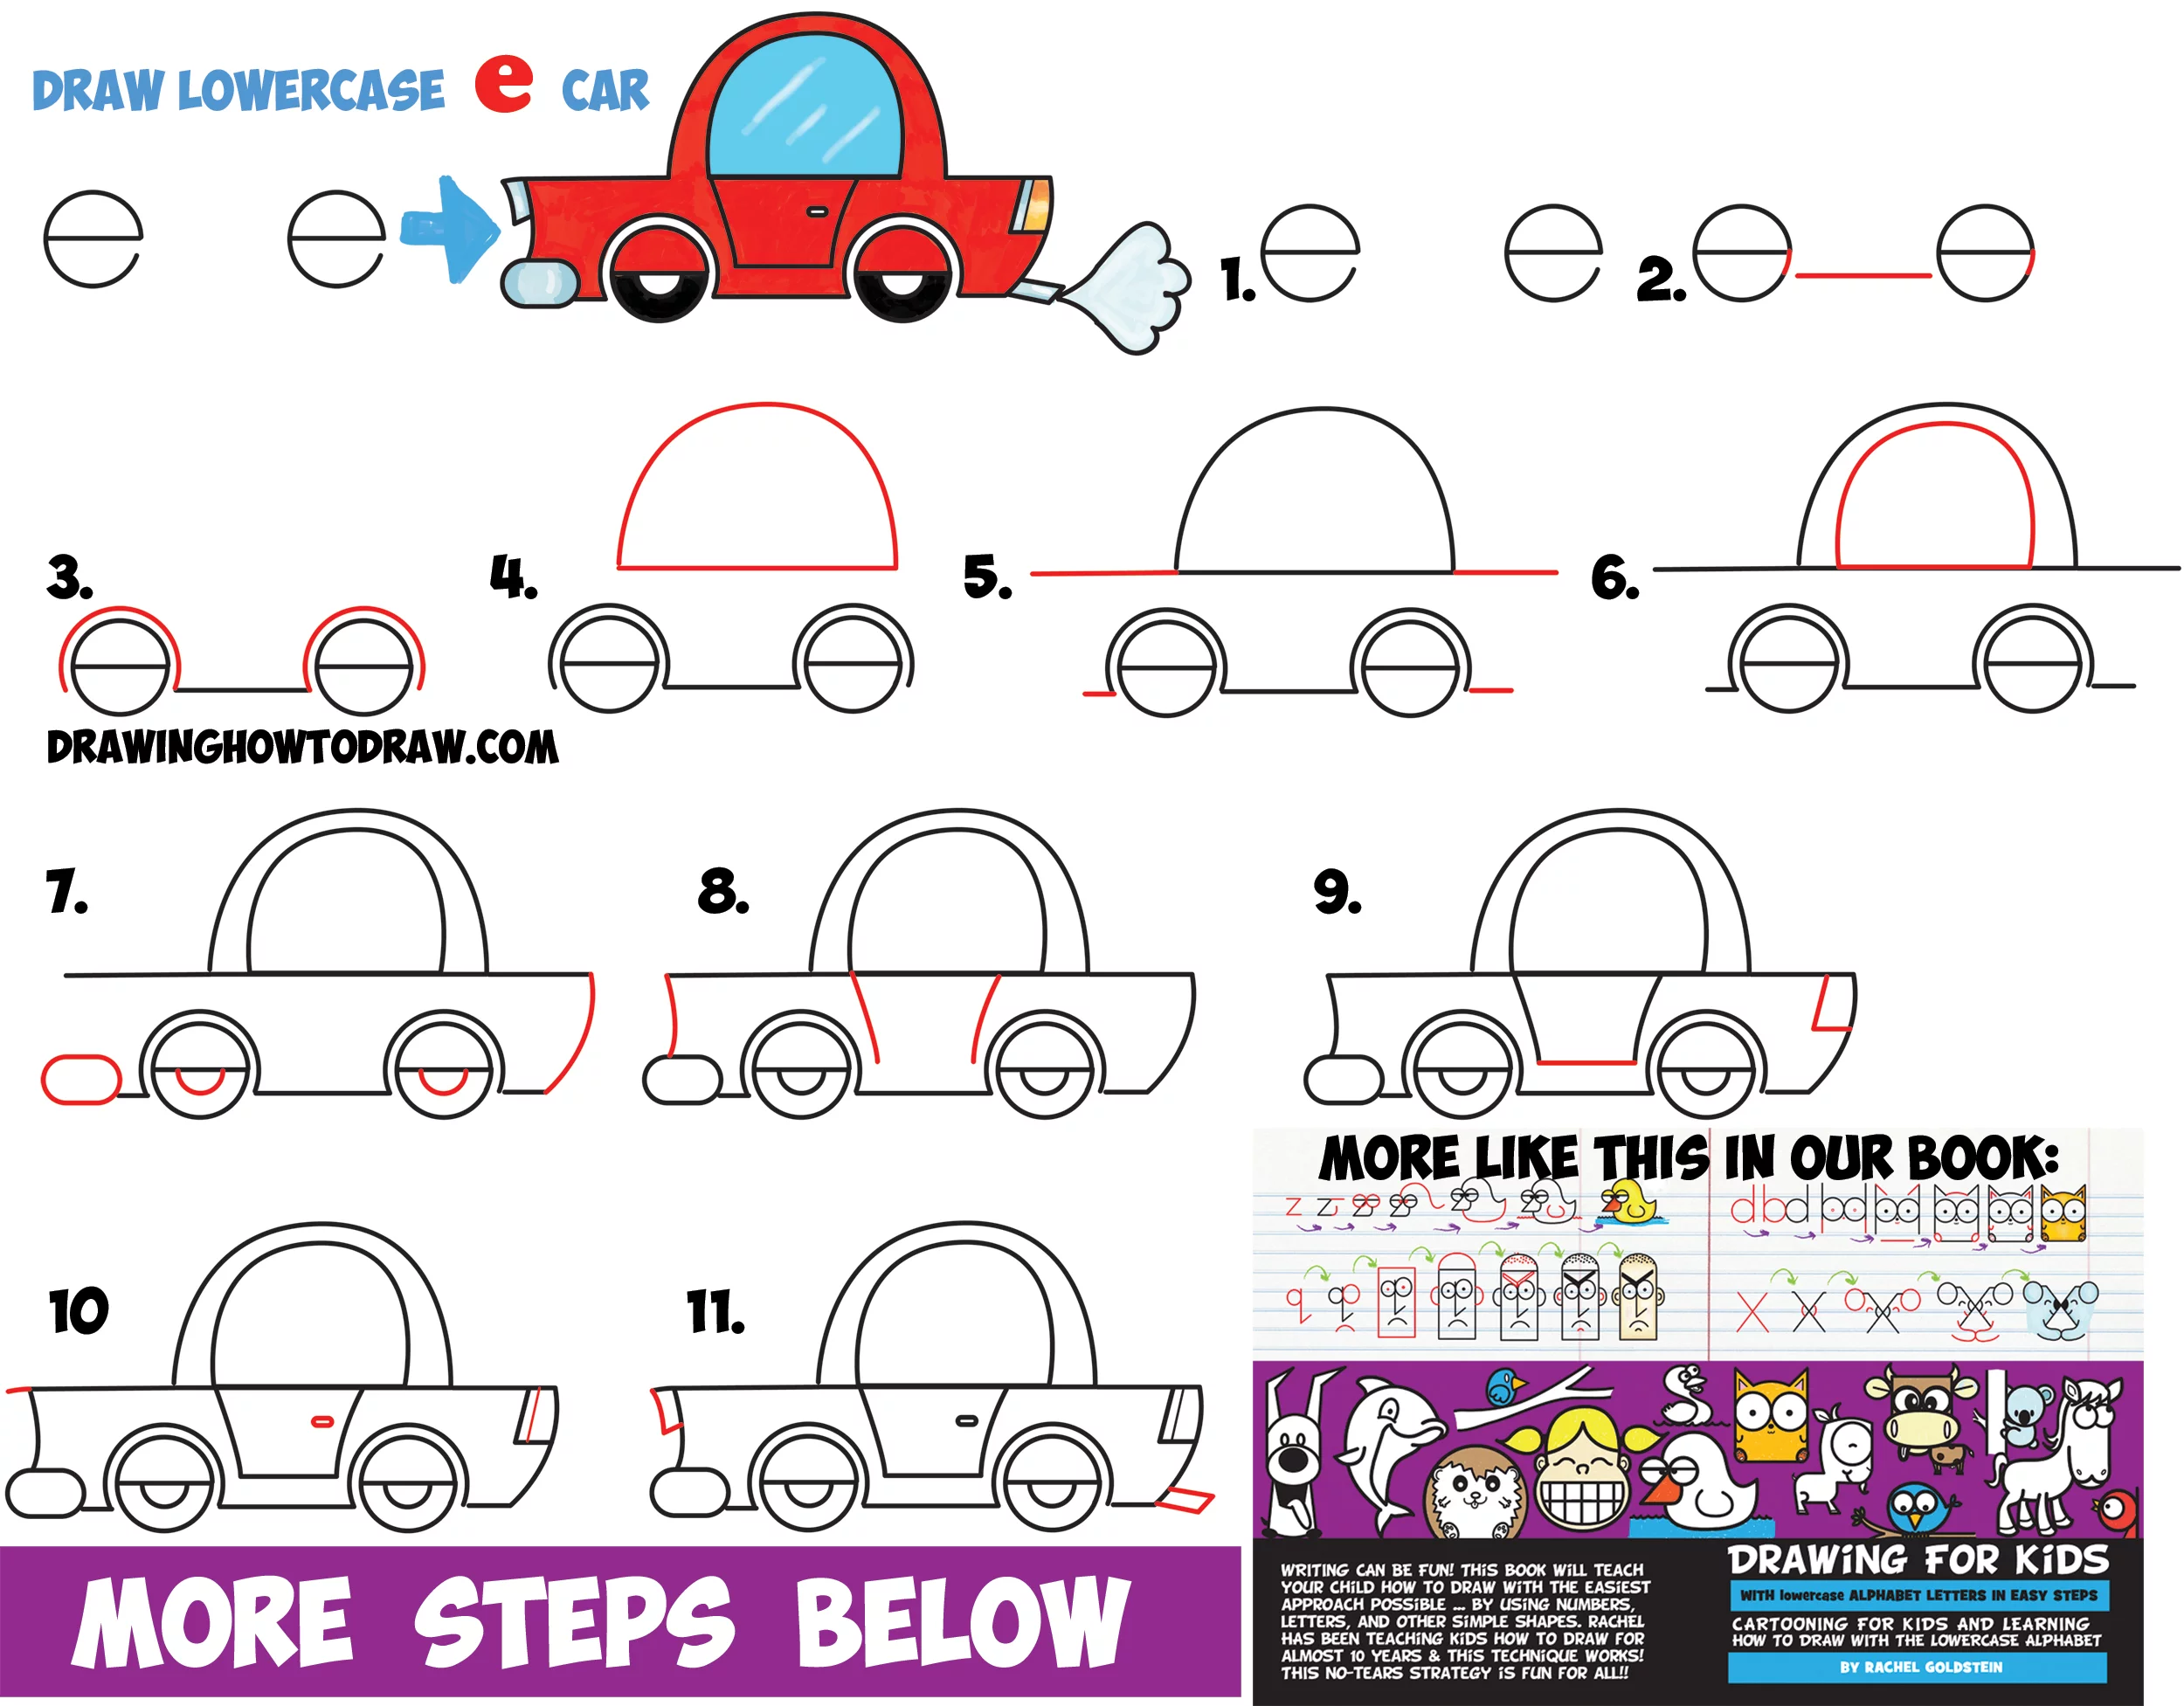 https://www.drawinghowtodraw.com/stepbystepdrawinglessons/wp-content/uploads/2016/09/how-to-draw-cartoon-cars-easy-drawing-tutorial-lowercase-letter-e-shape.jpg.webp